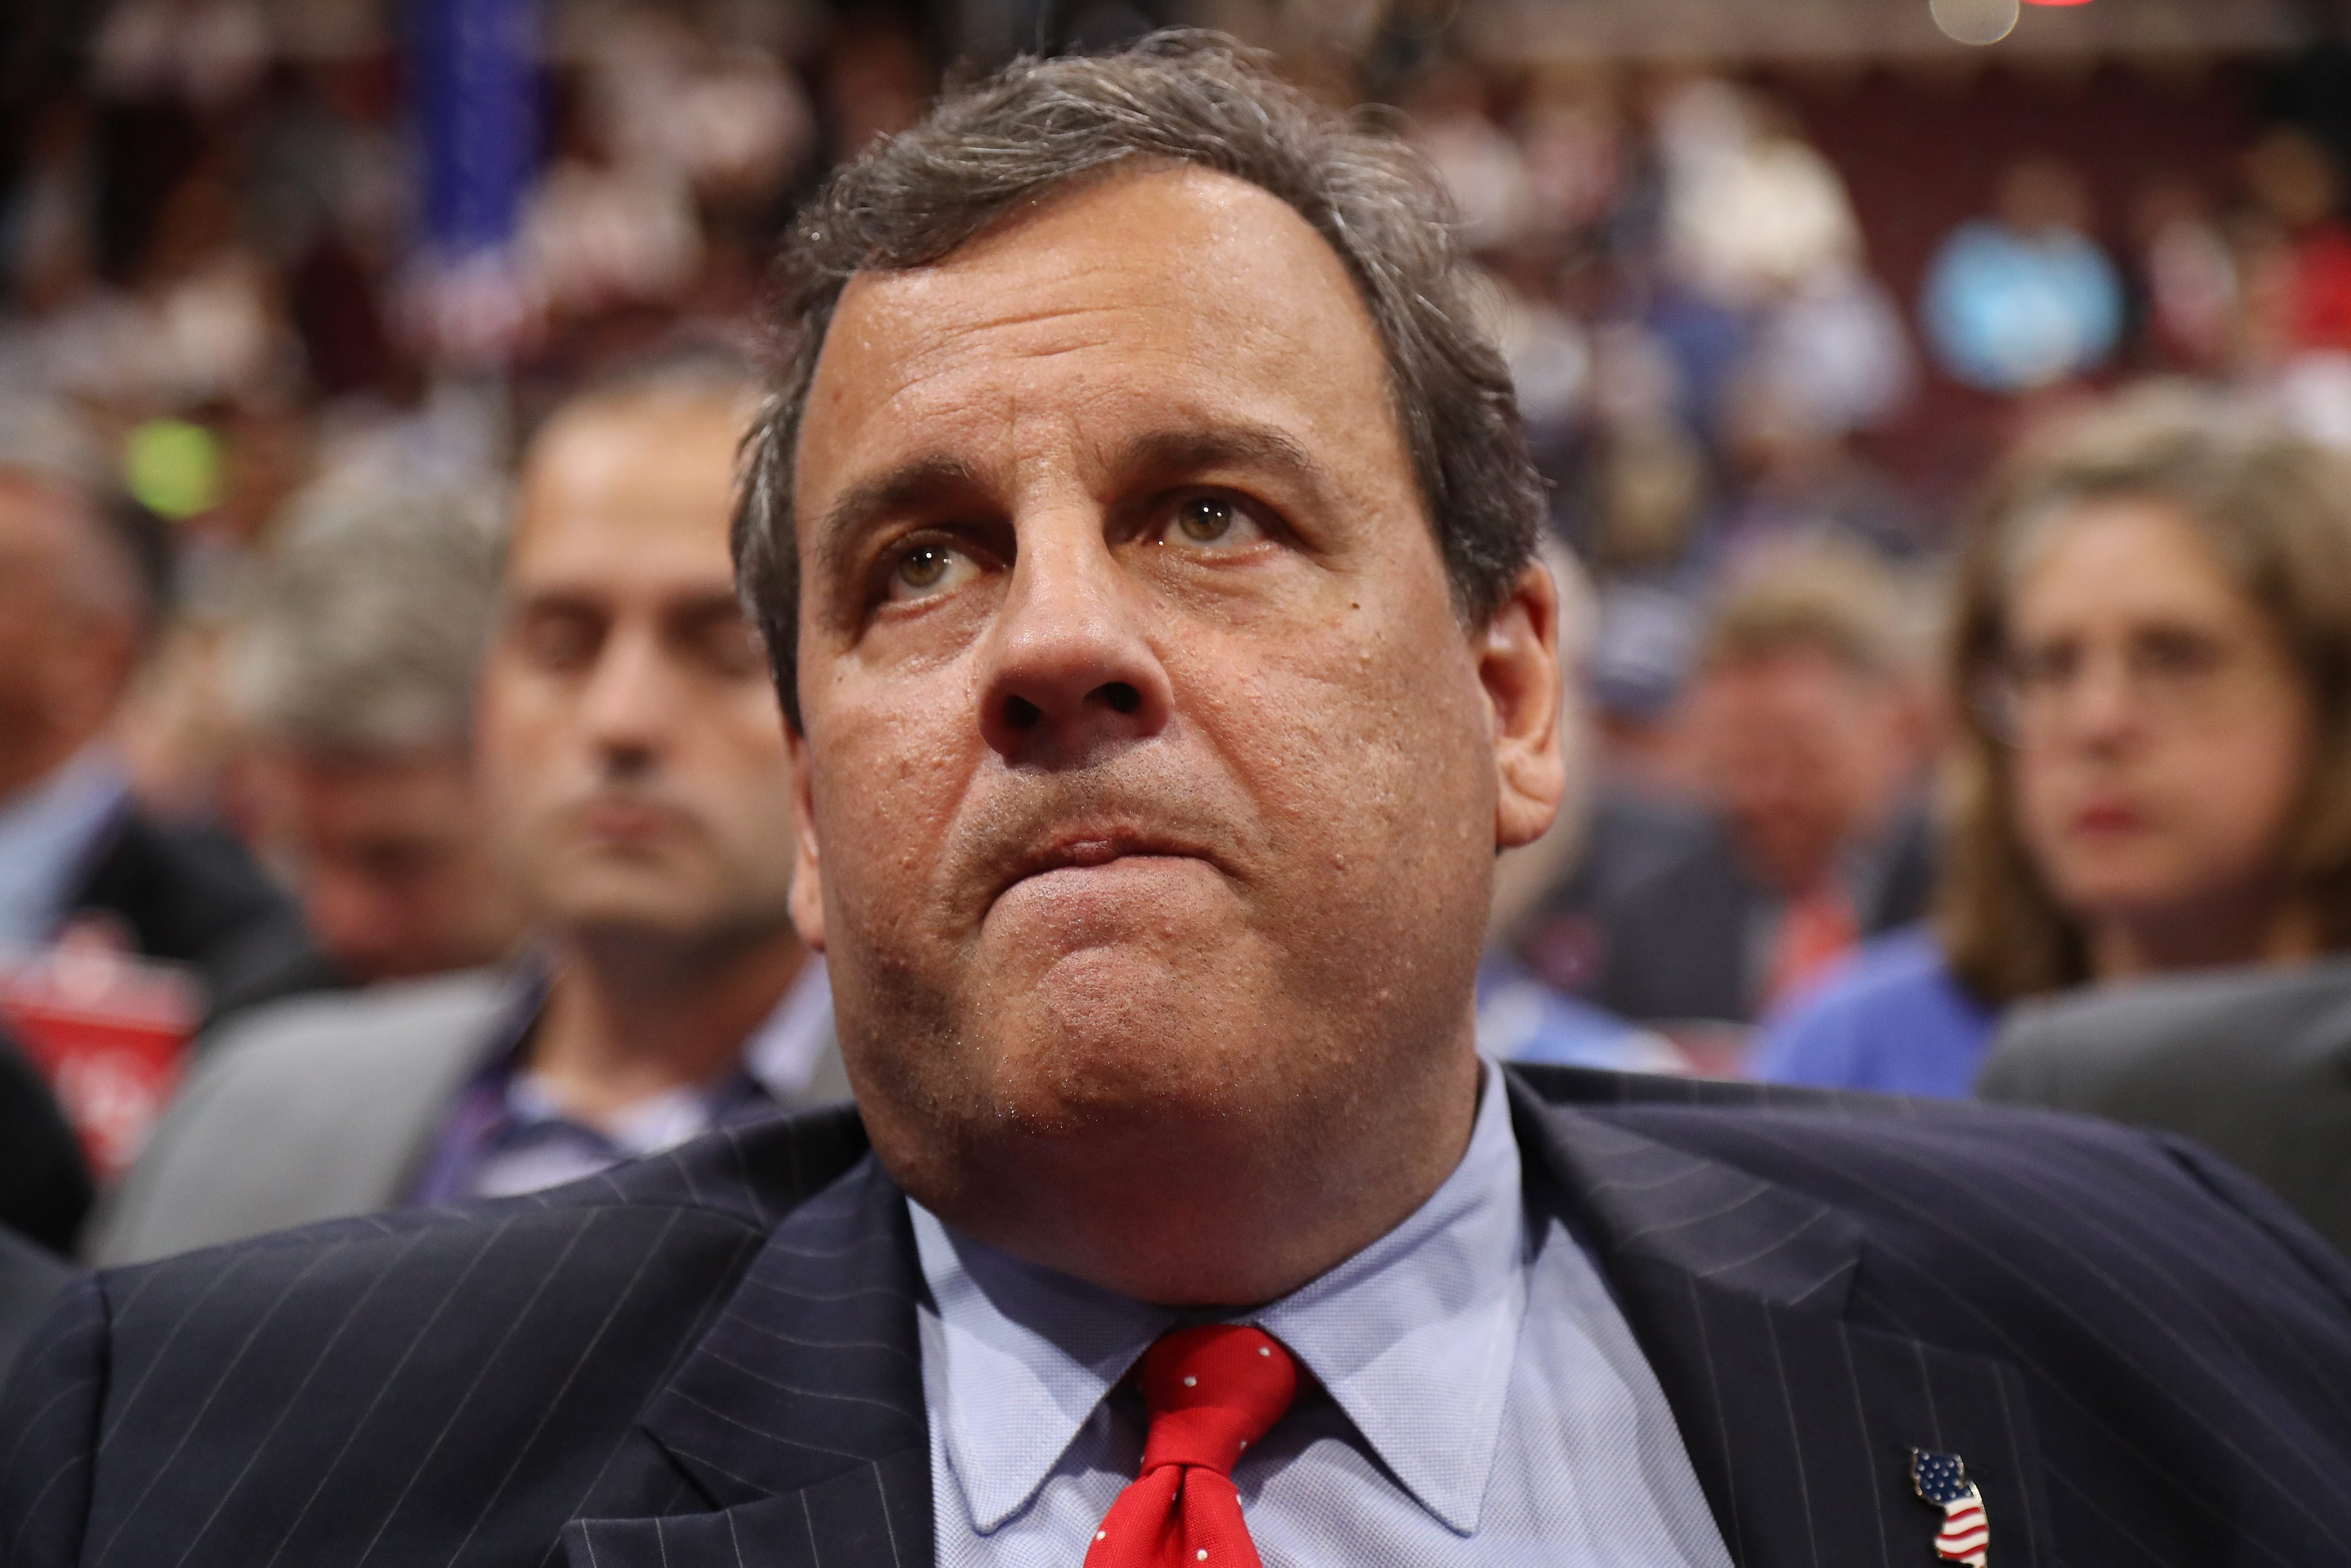 New Jersey Governor Chris Christie listens during the second session on the first day of the 2016 Republican National Convention at Quicken Loans Arena in Cleveland, July 18, 2016. (Andrew Gombert—EPA)